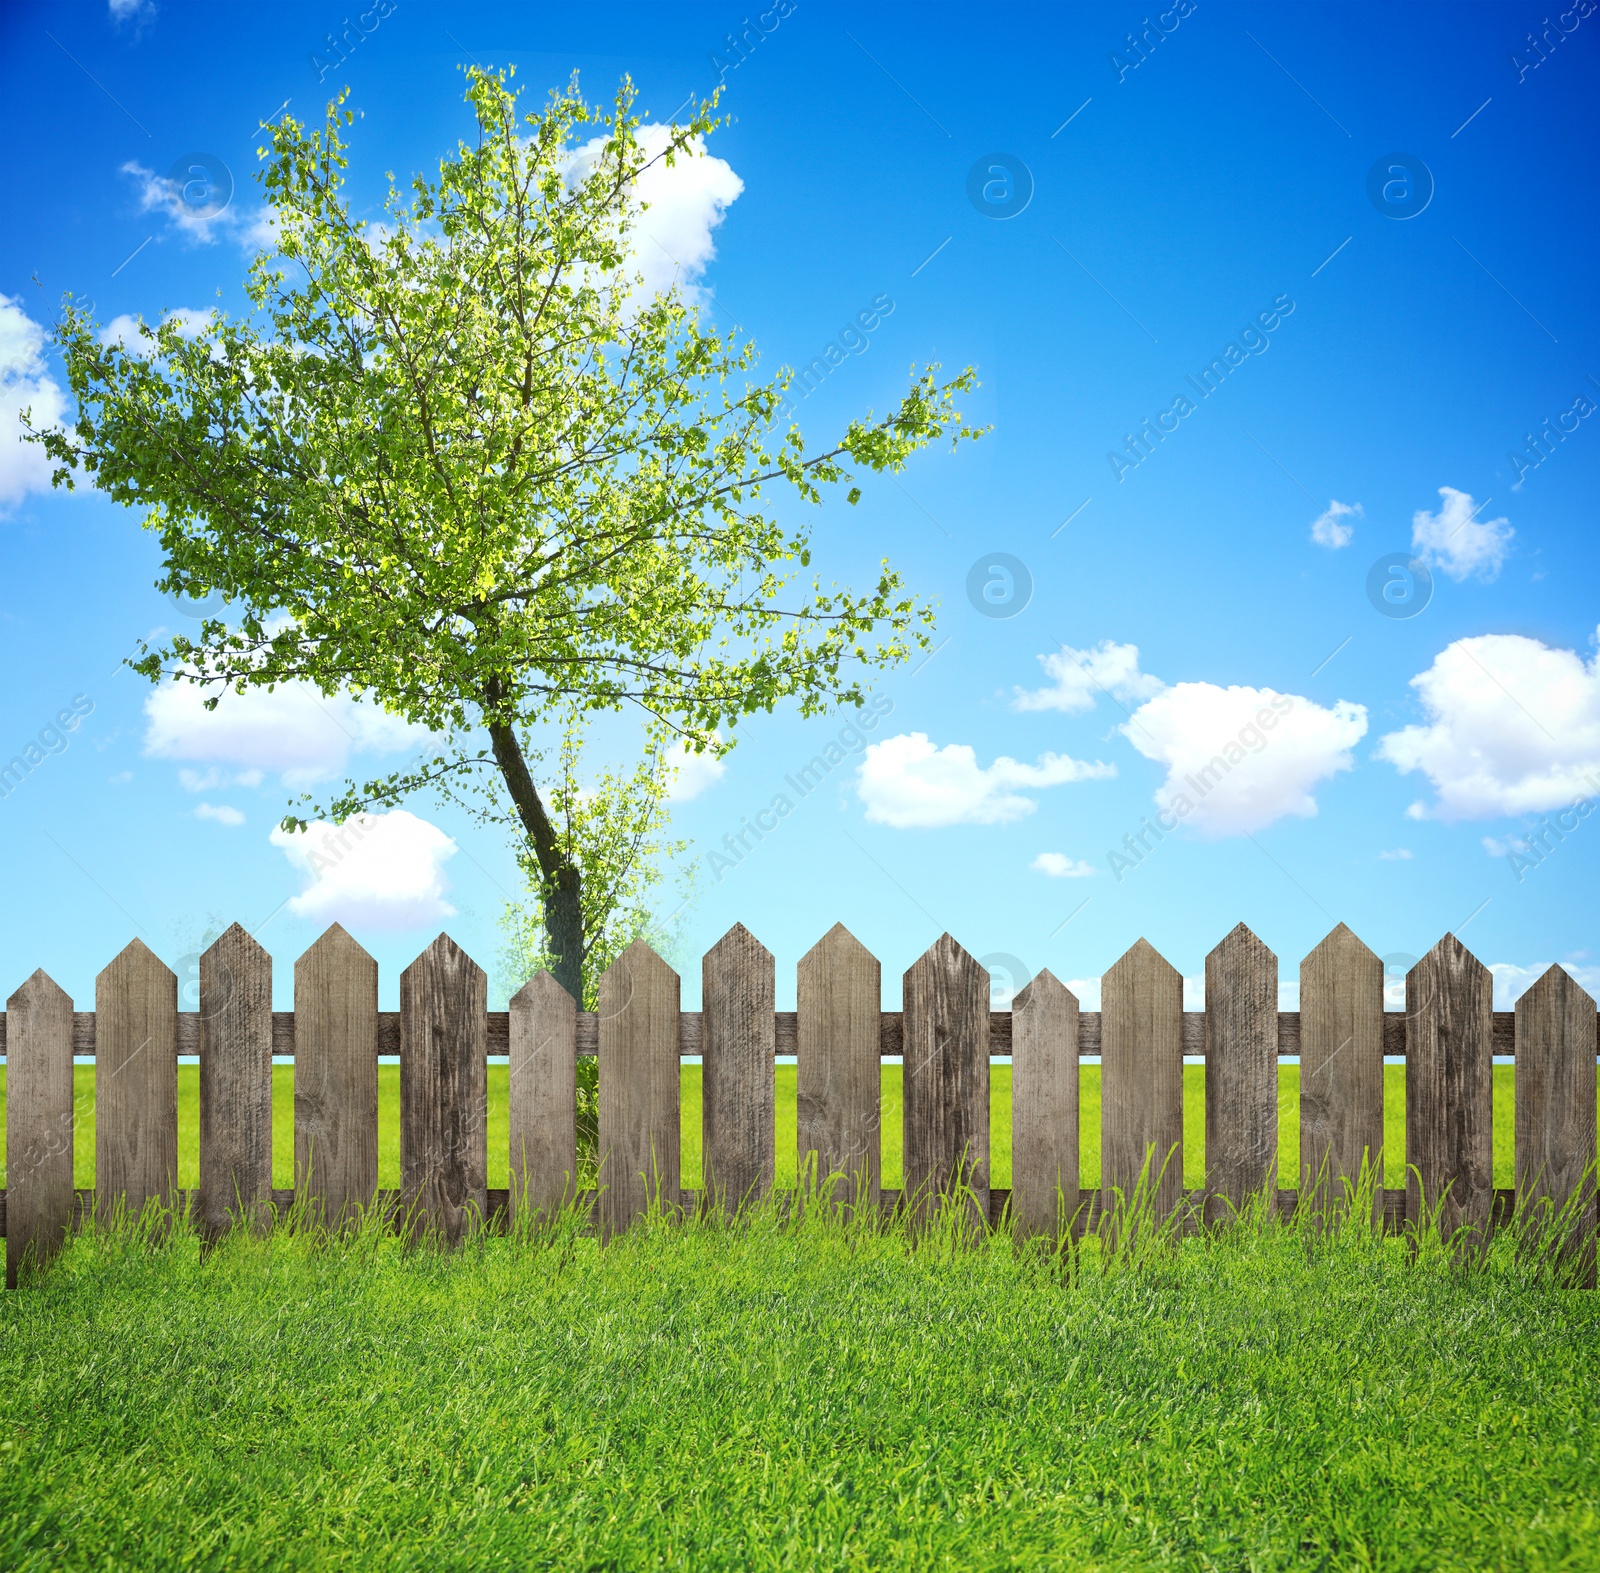 Image of Wooden fence, tree and green grass outdoors